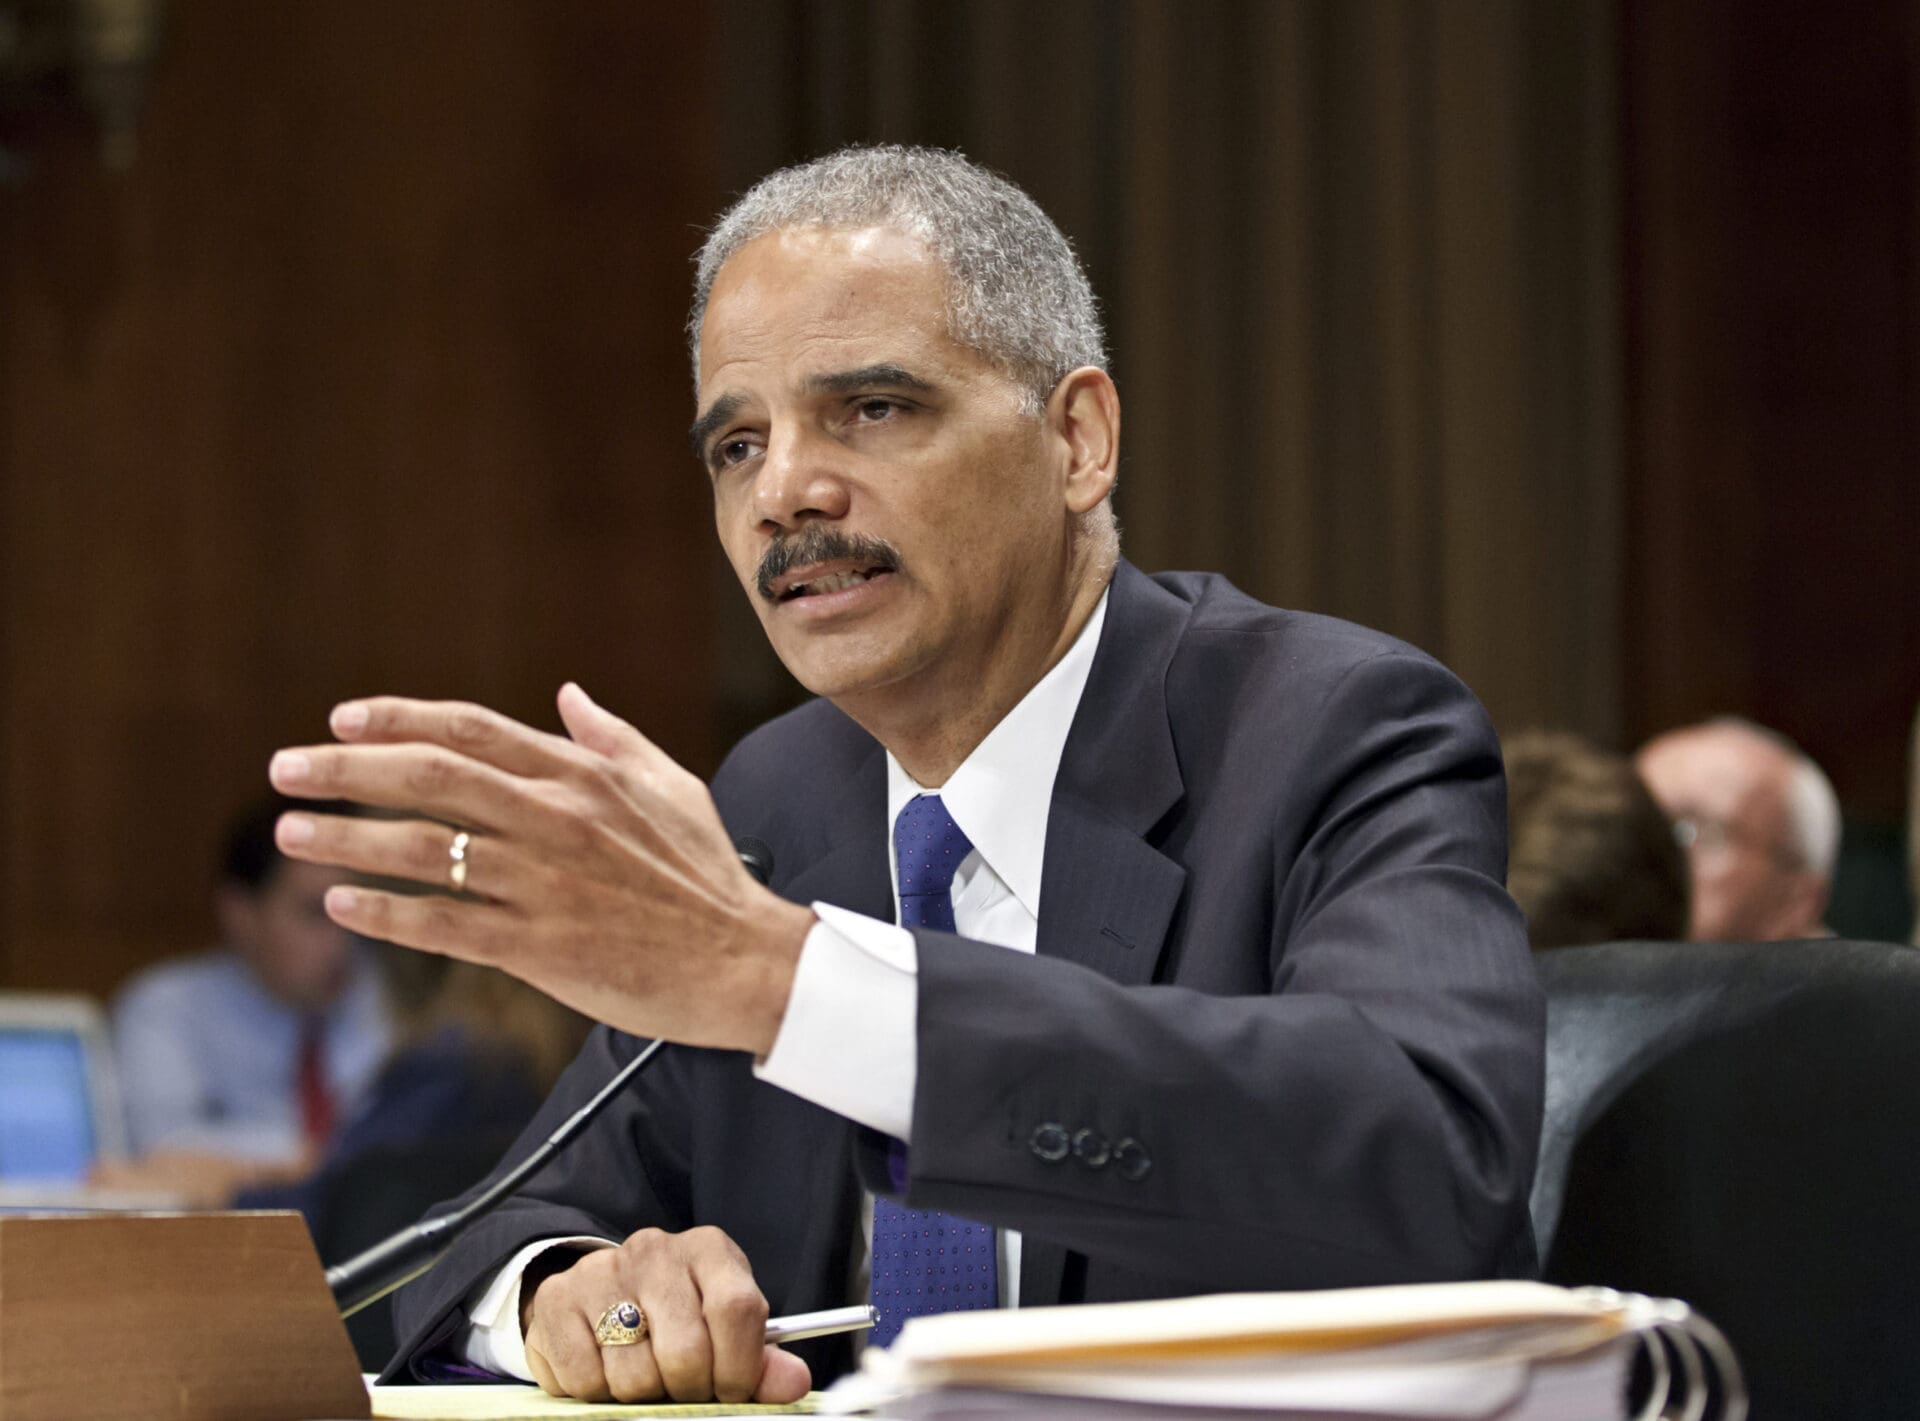 Eric Holder fast and furious